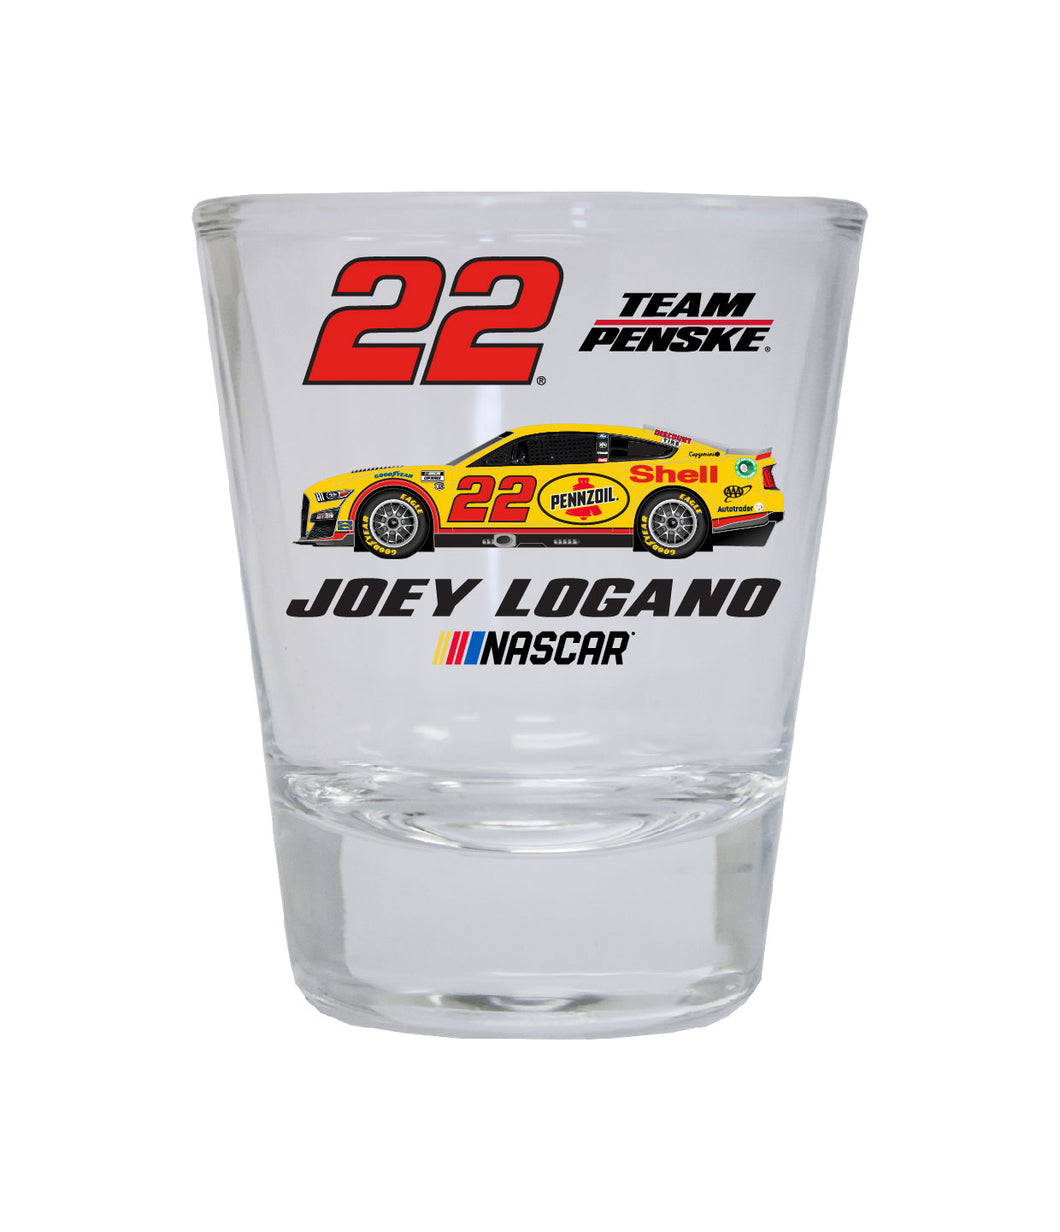 #22 Joey Logano NASCAR Officially Licensed Round Shot Glass